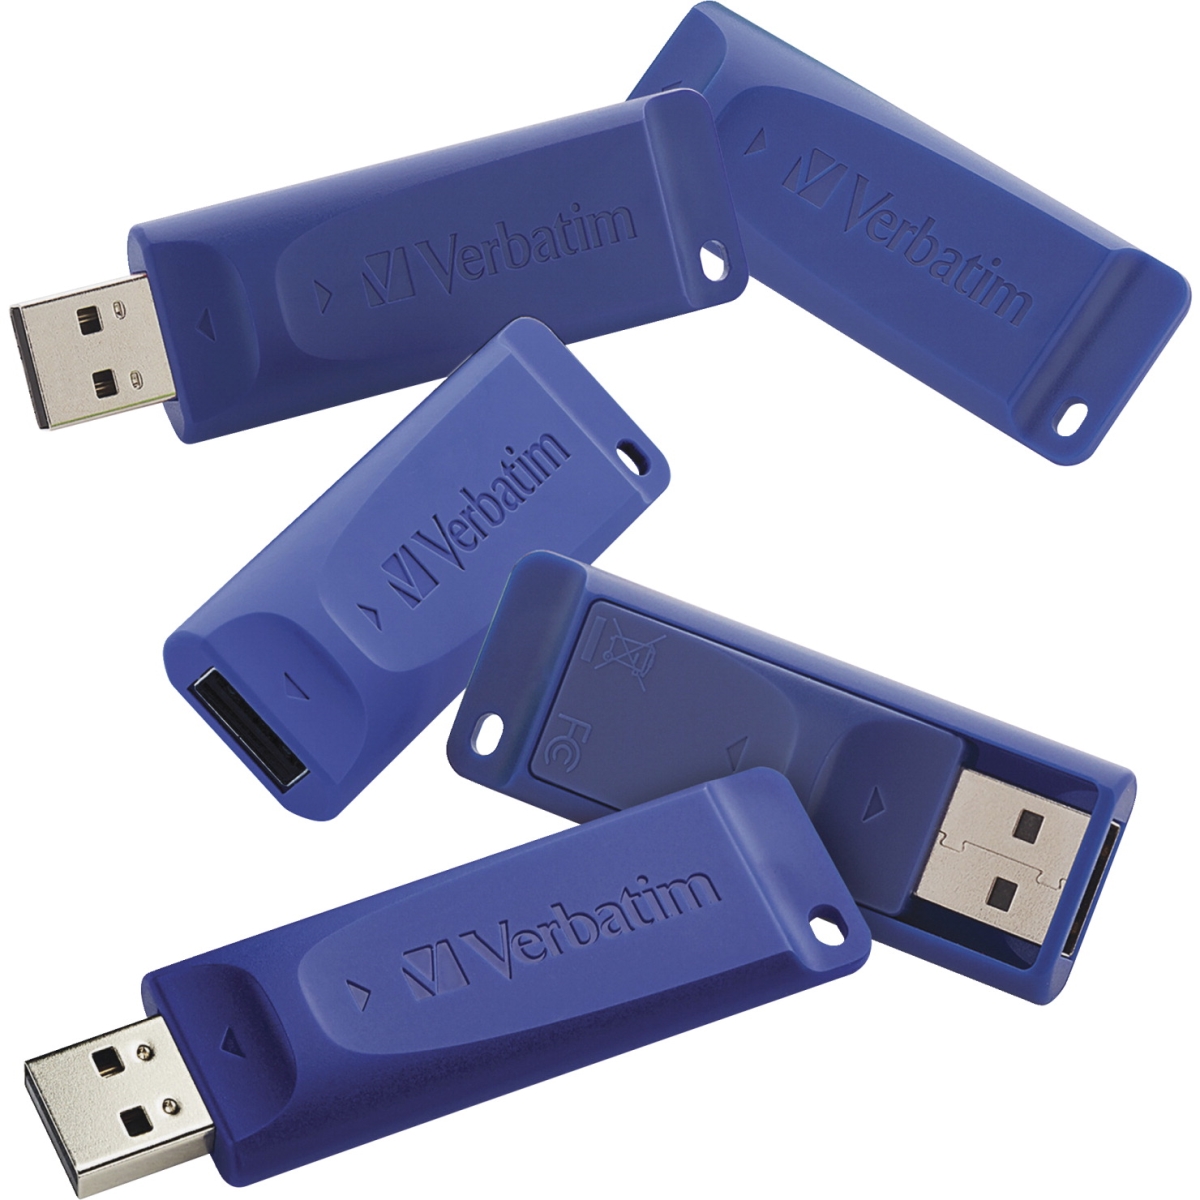 Picture of Verbatim 1599485 USB Flash Drive, Retractable - 16GB, Pack of 5 - Blue